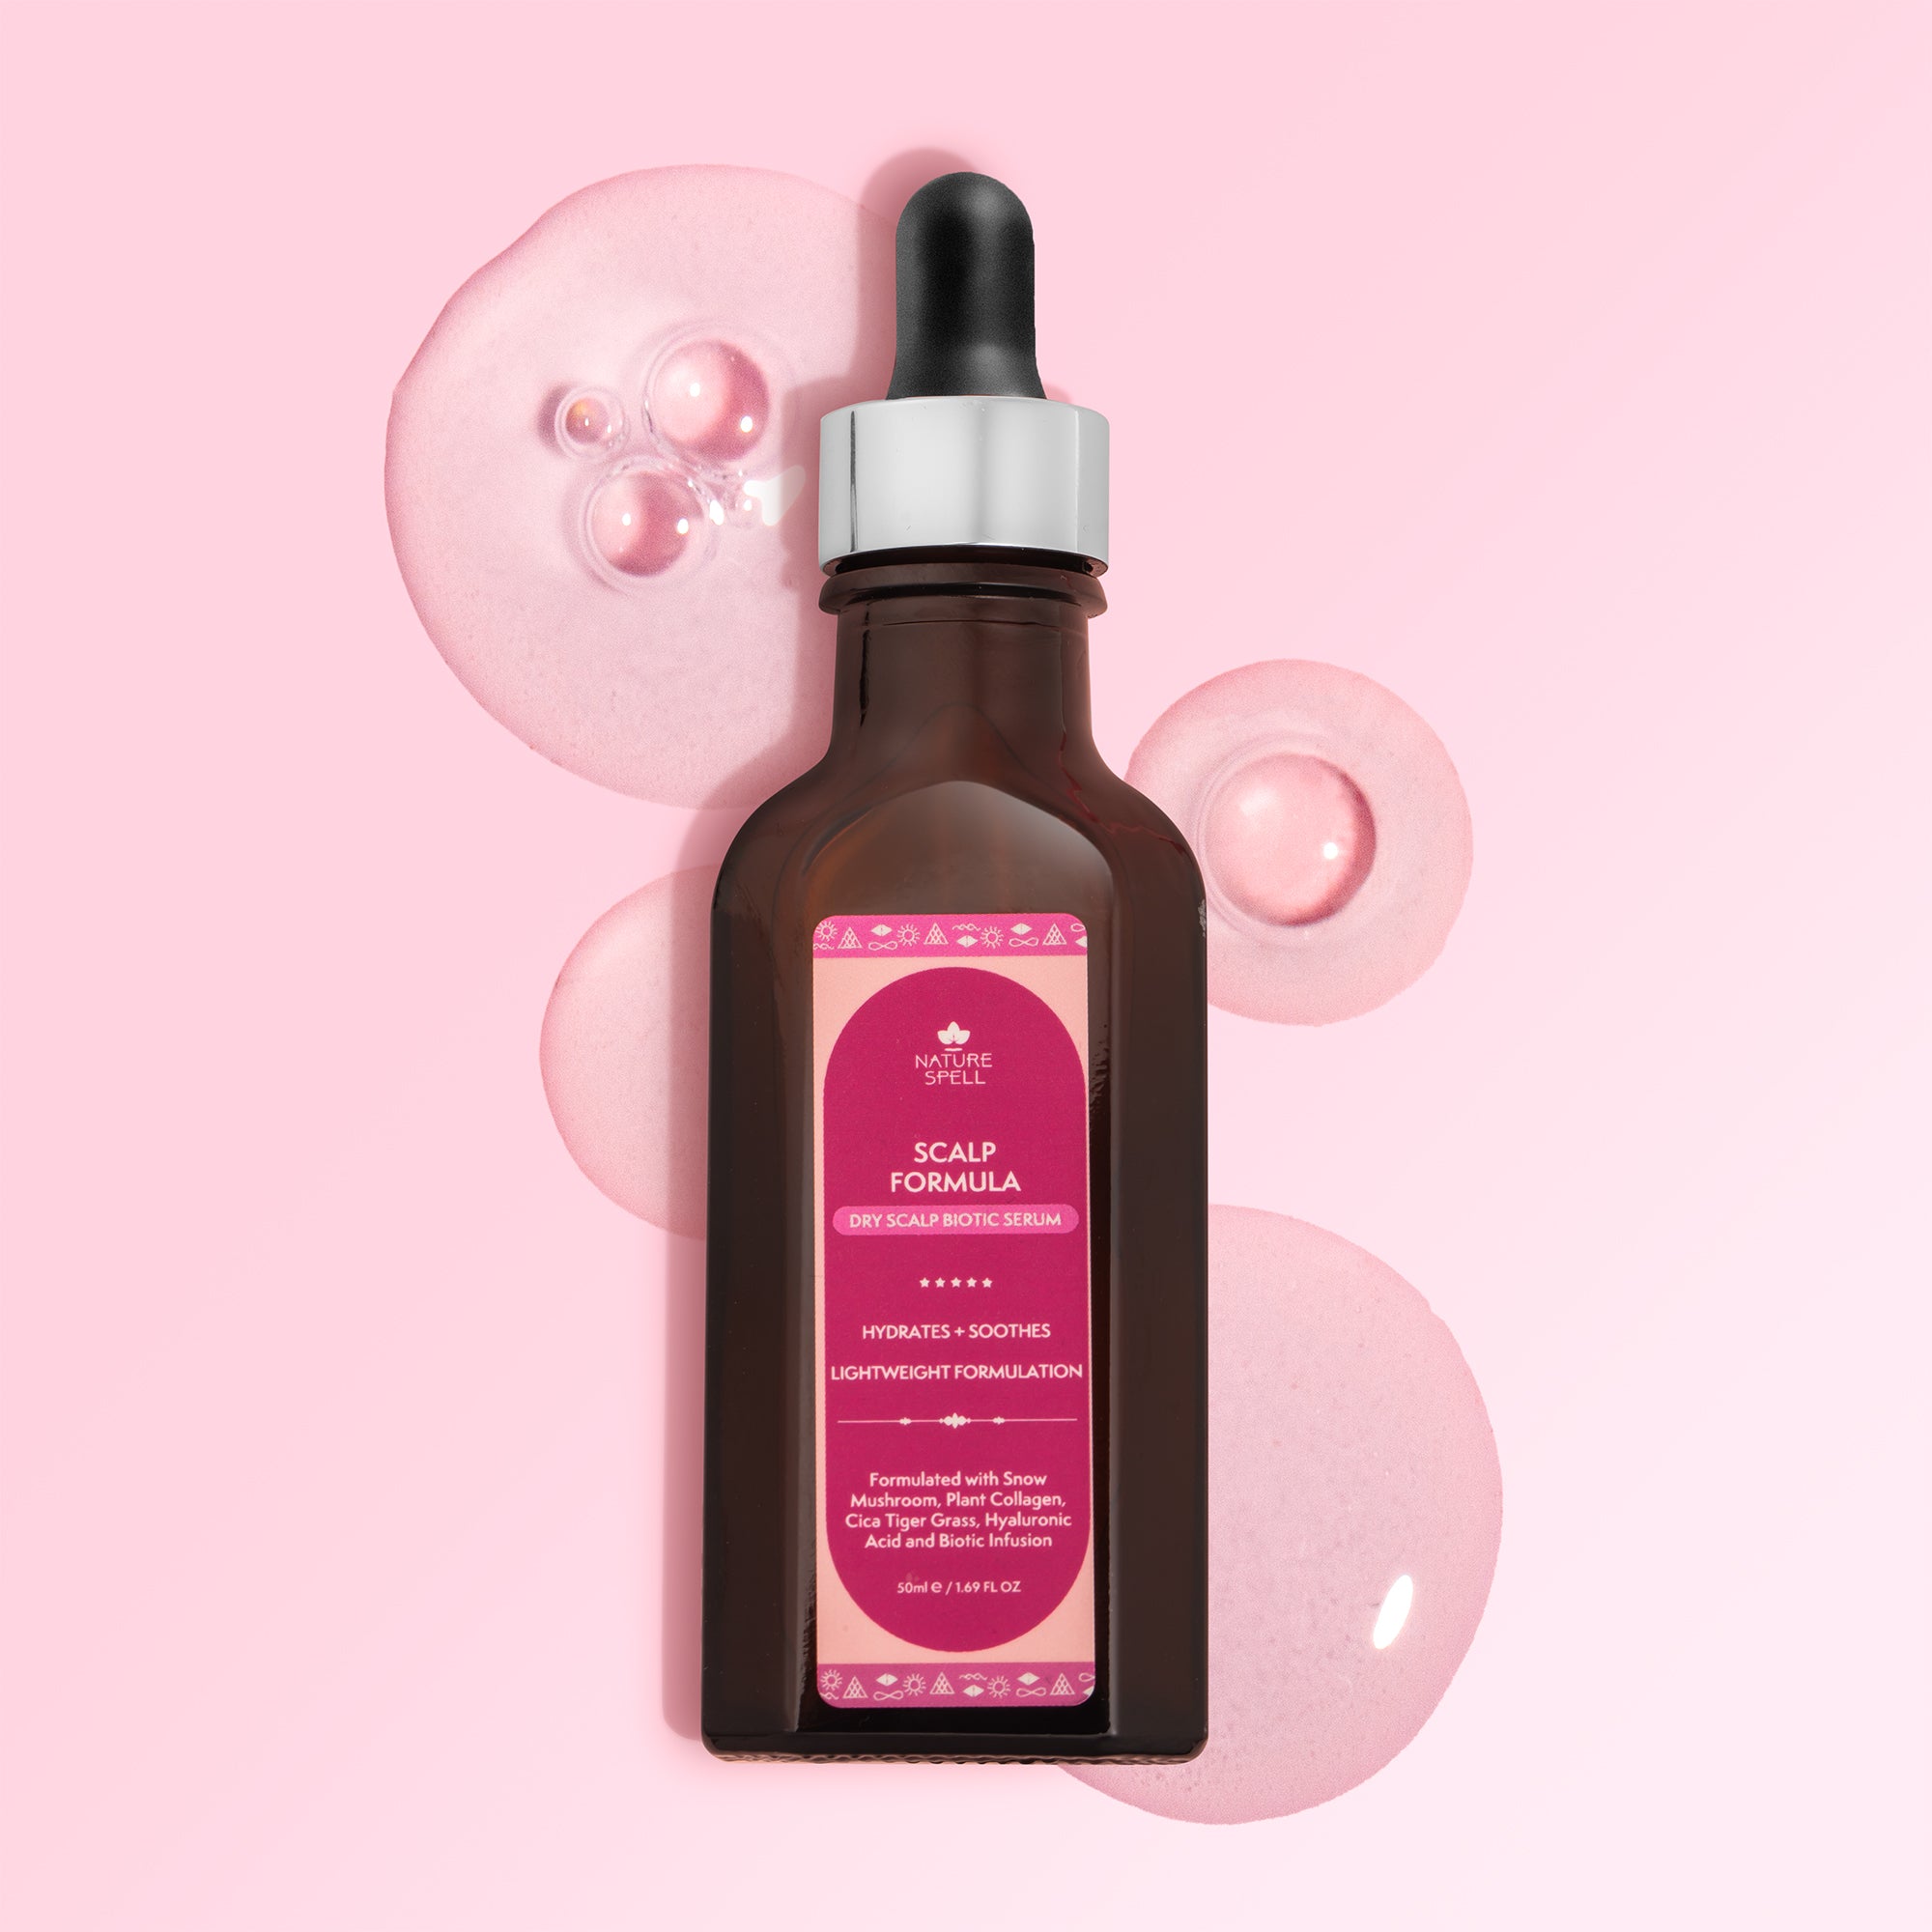 Dry Scalp Formula - Calm & Clear Biotic Serum for Dry Scalp with Hyaluronic Acid + Plant Collagen